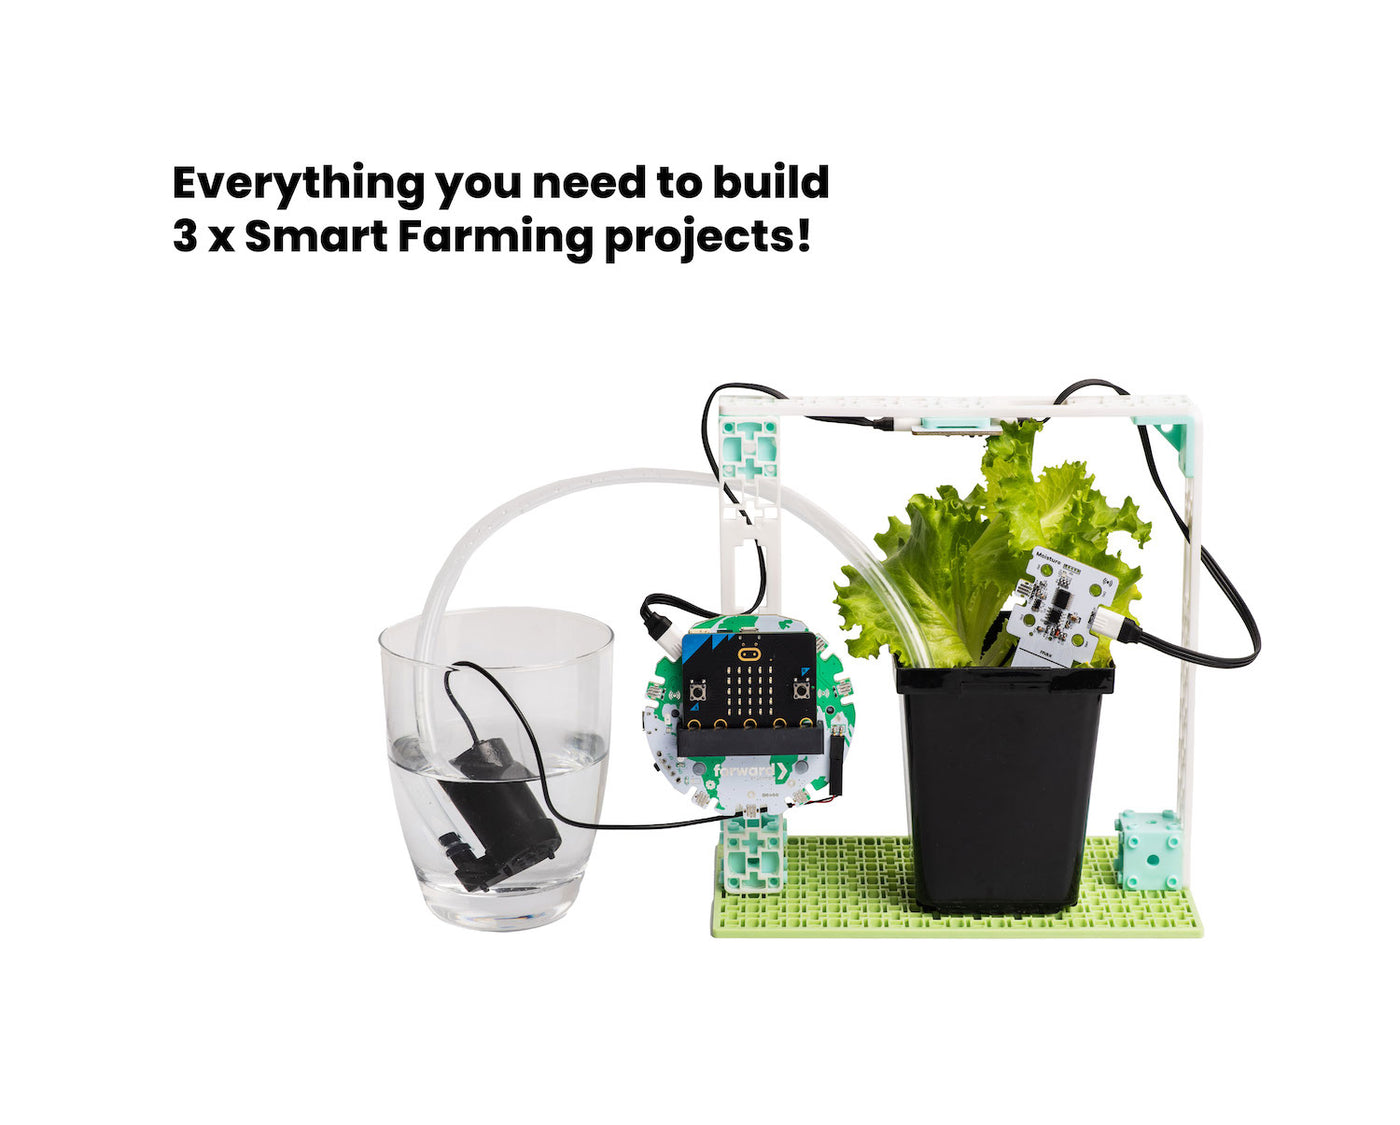 Smart Farming Climate Action Kit by Forward Education